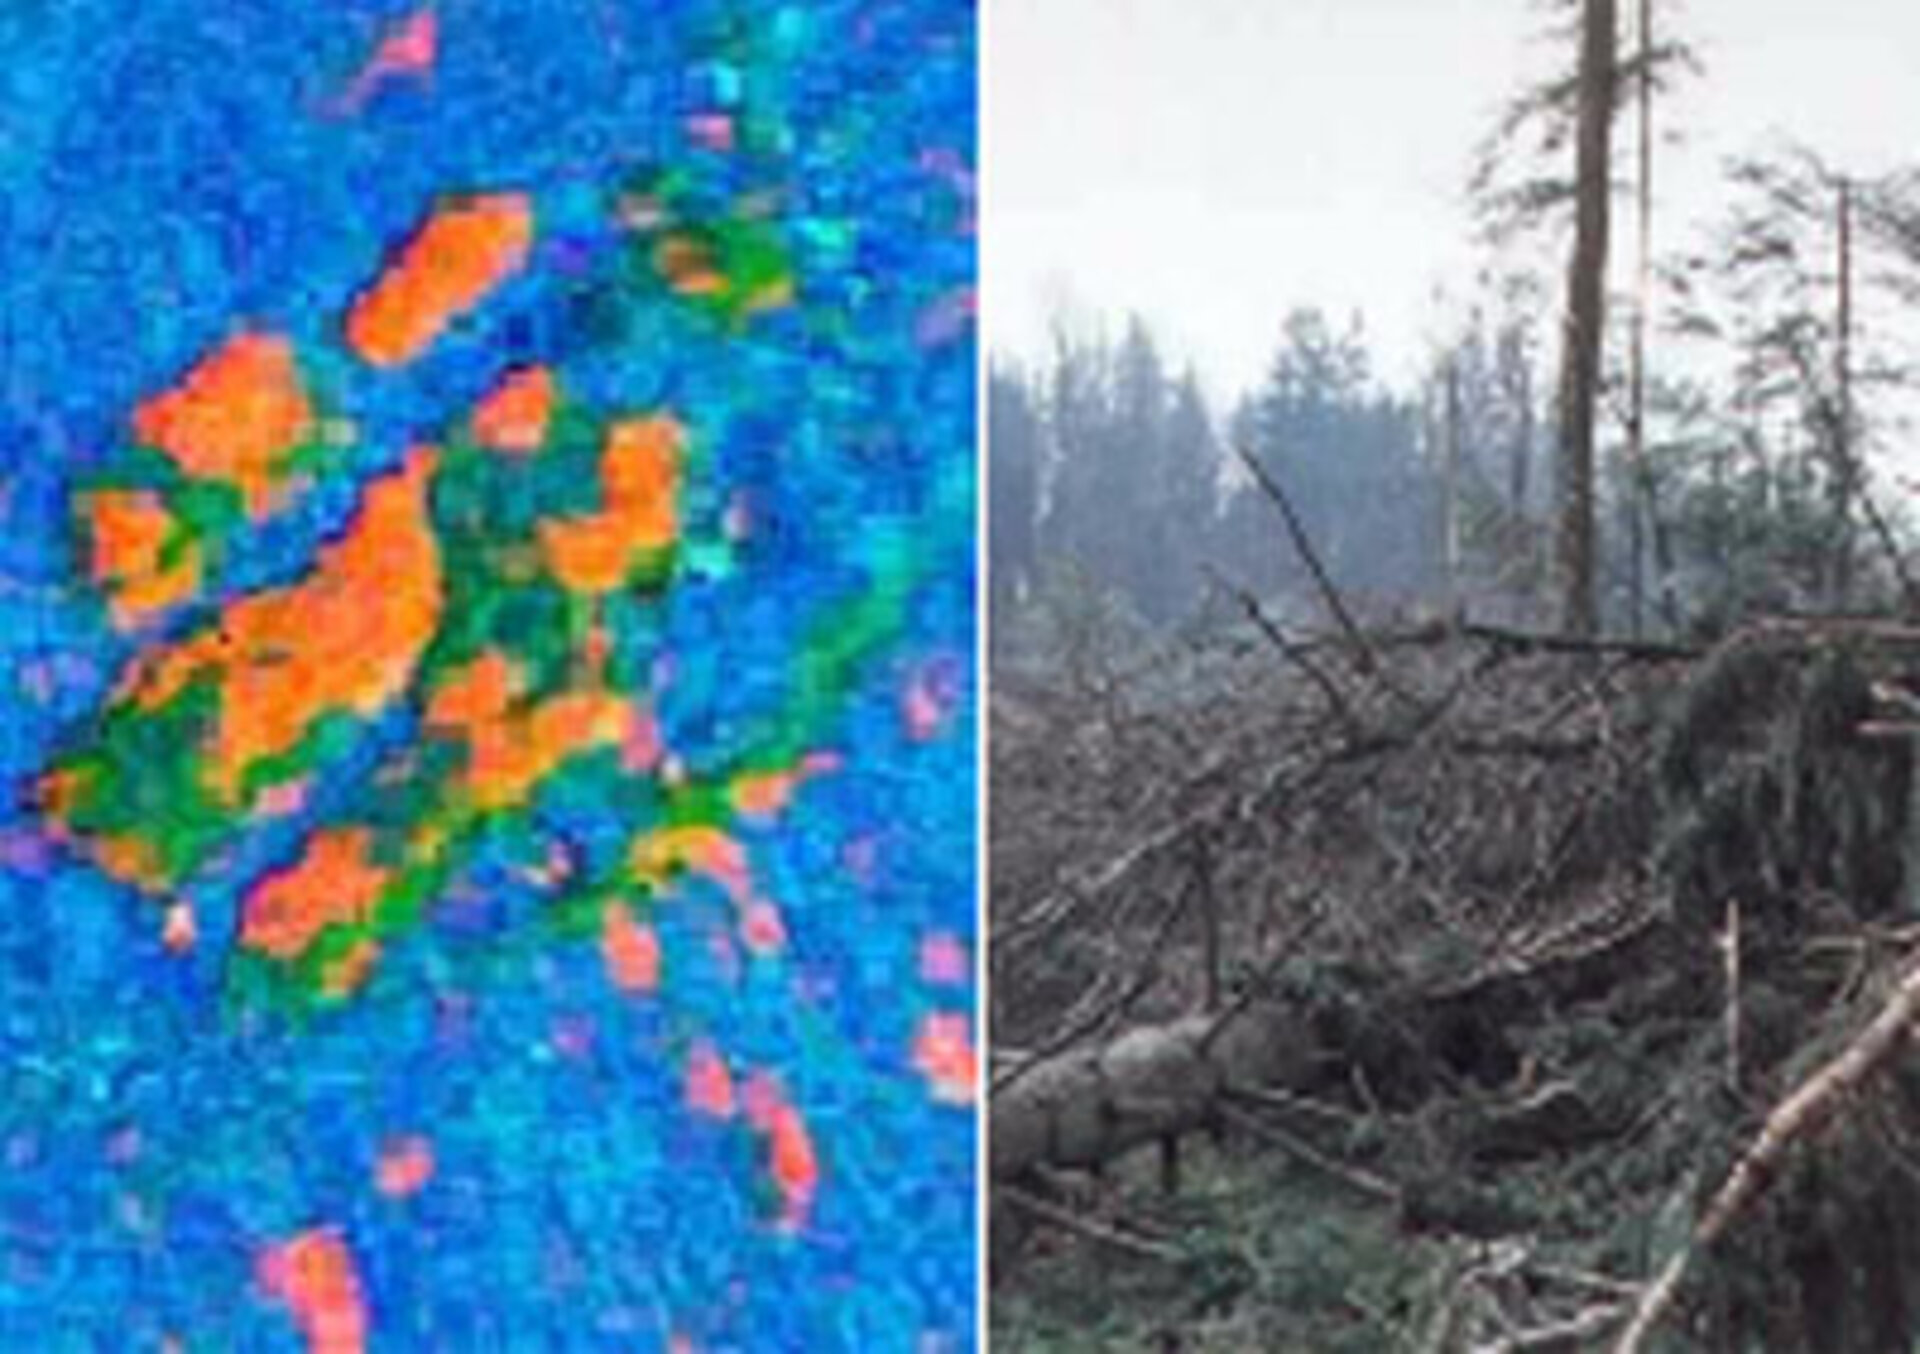 Forest damage (orange areas) caused by storm "Lothar" in Dec. 1999.